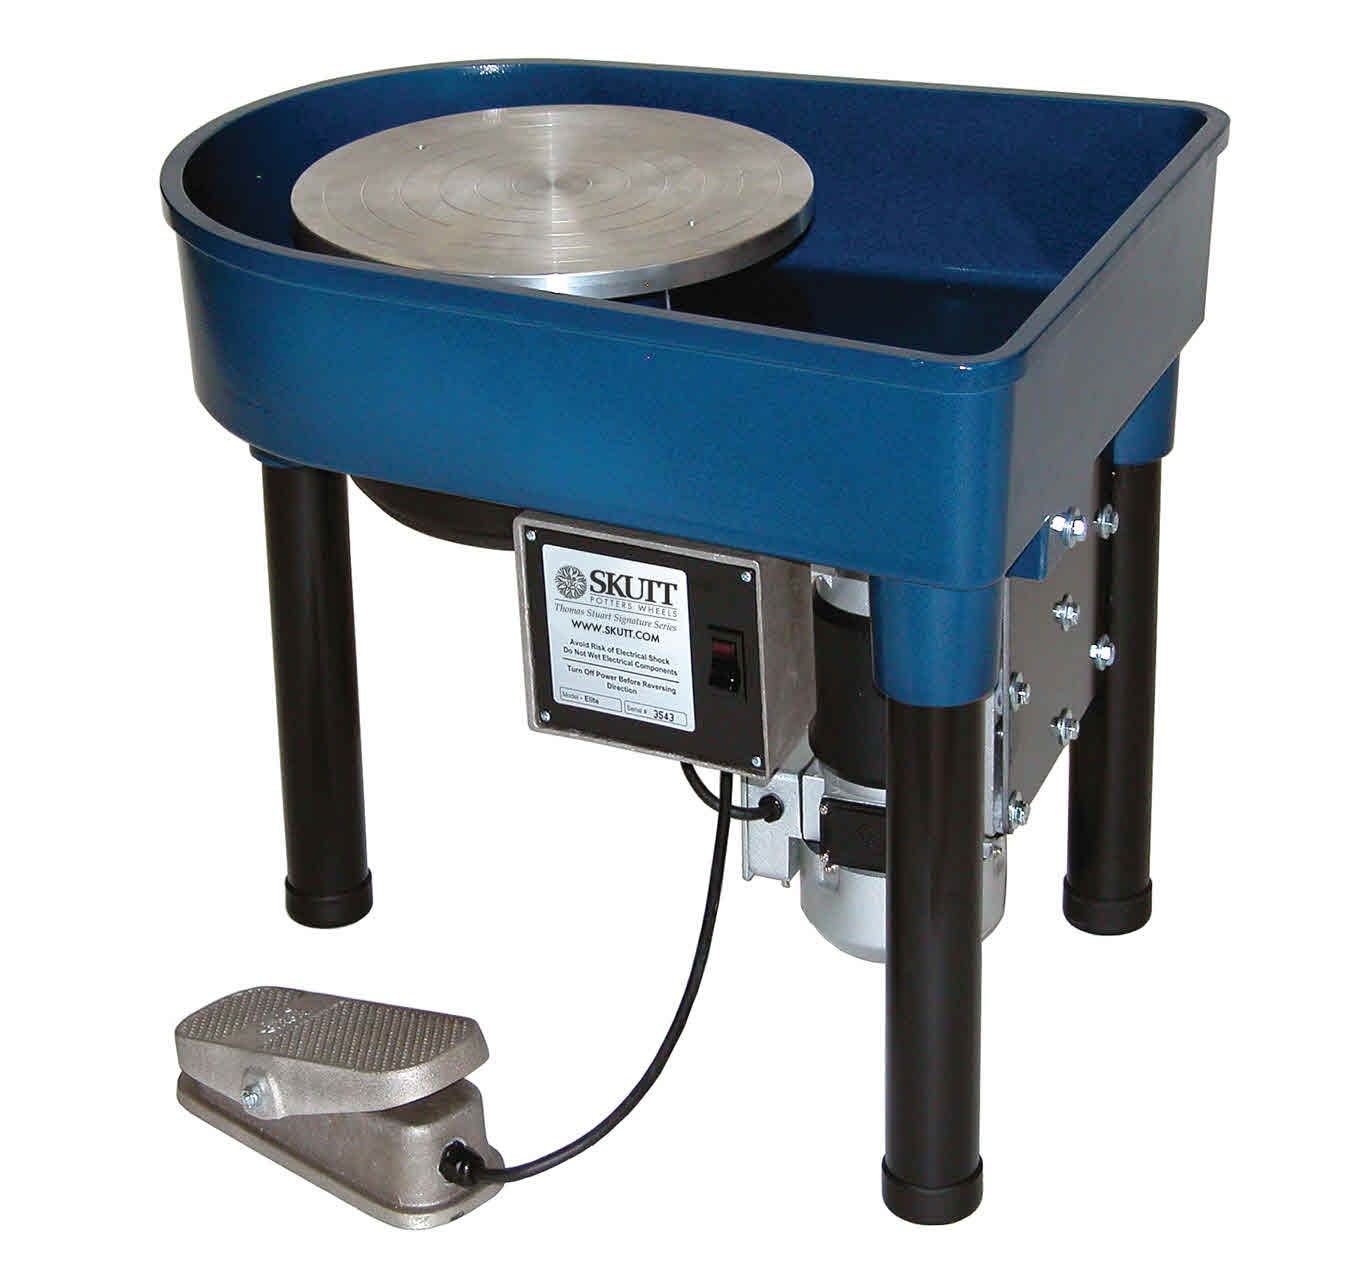 Skutt "Elite" Electric Potter's Wheel with SSX 1/2 hp, built-in pan